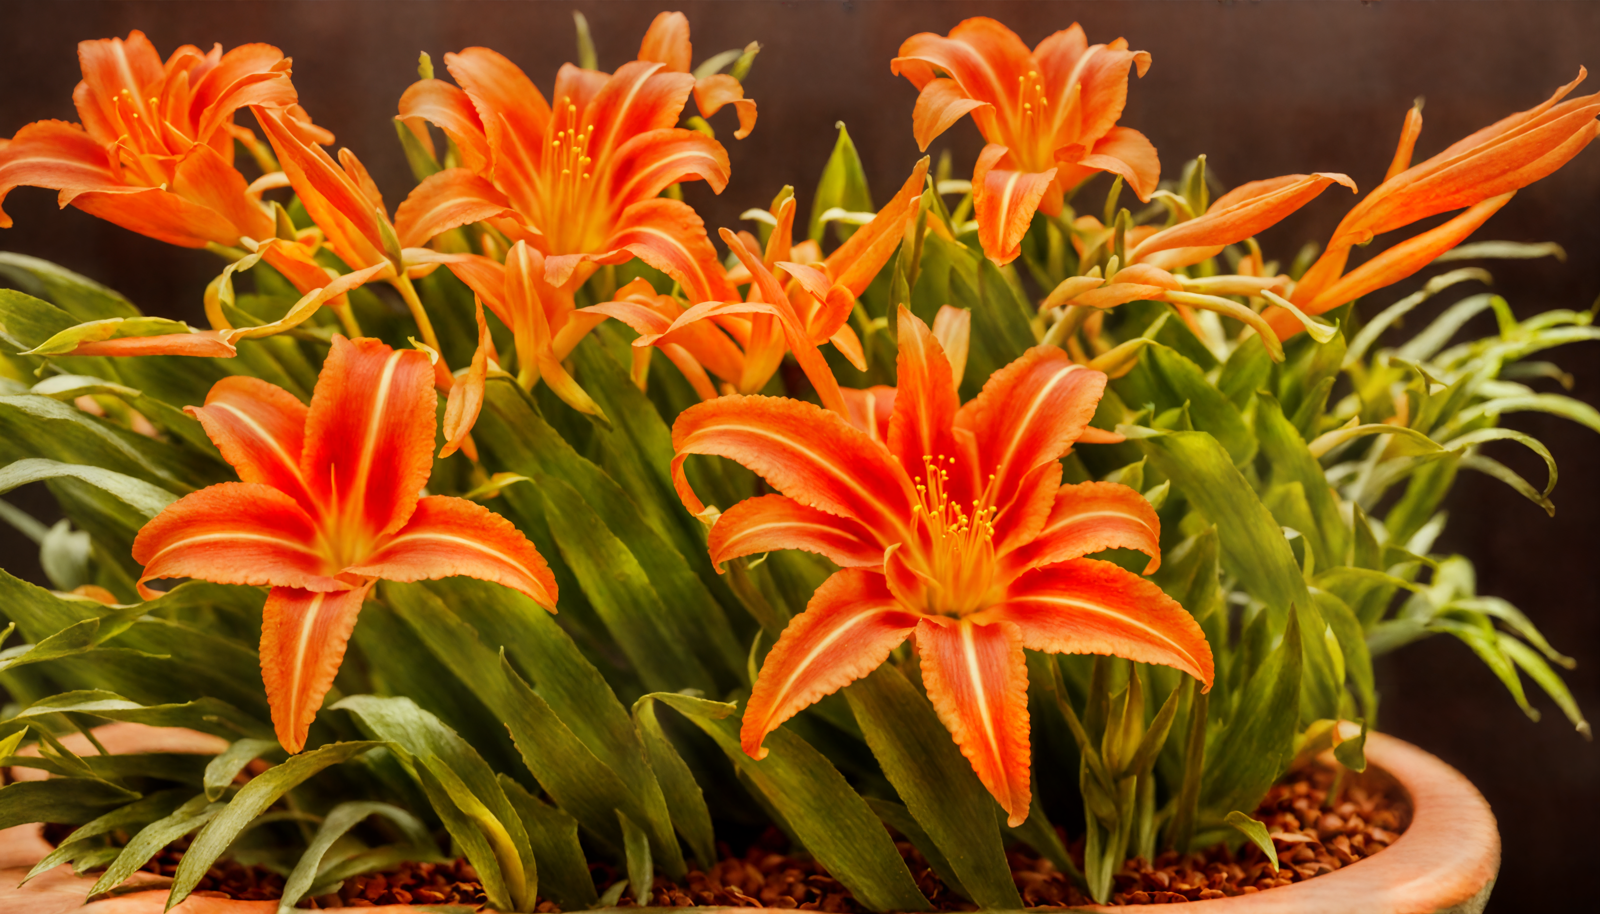 Hemerocallis fulva, or orange daylilies, arranged in a bowl as indoor decor, with clear lighting and a dark background.